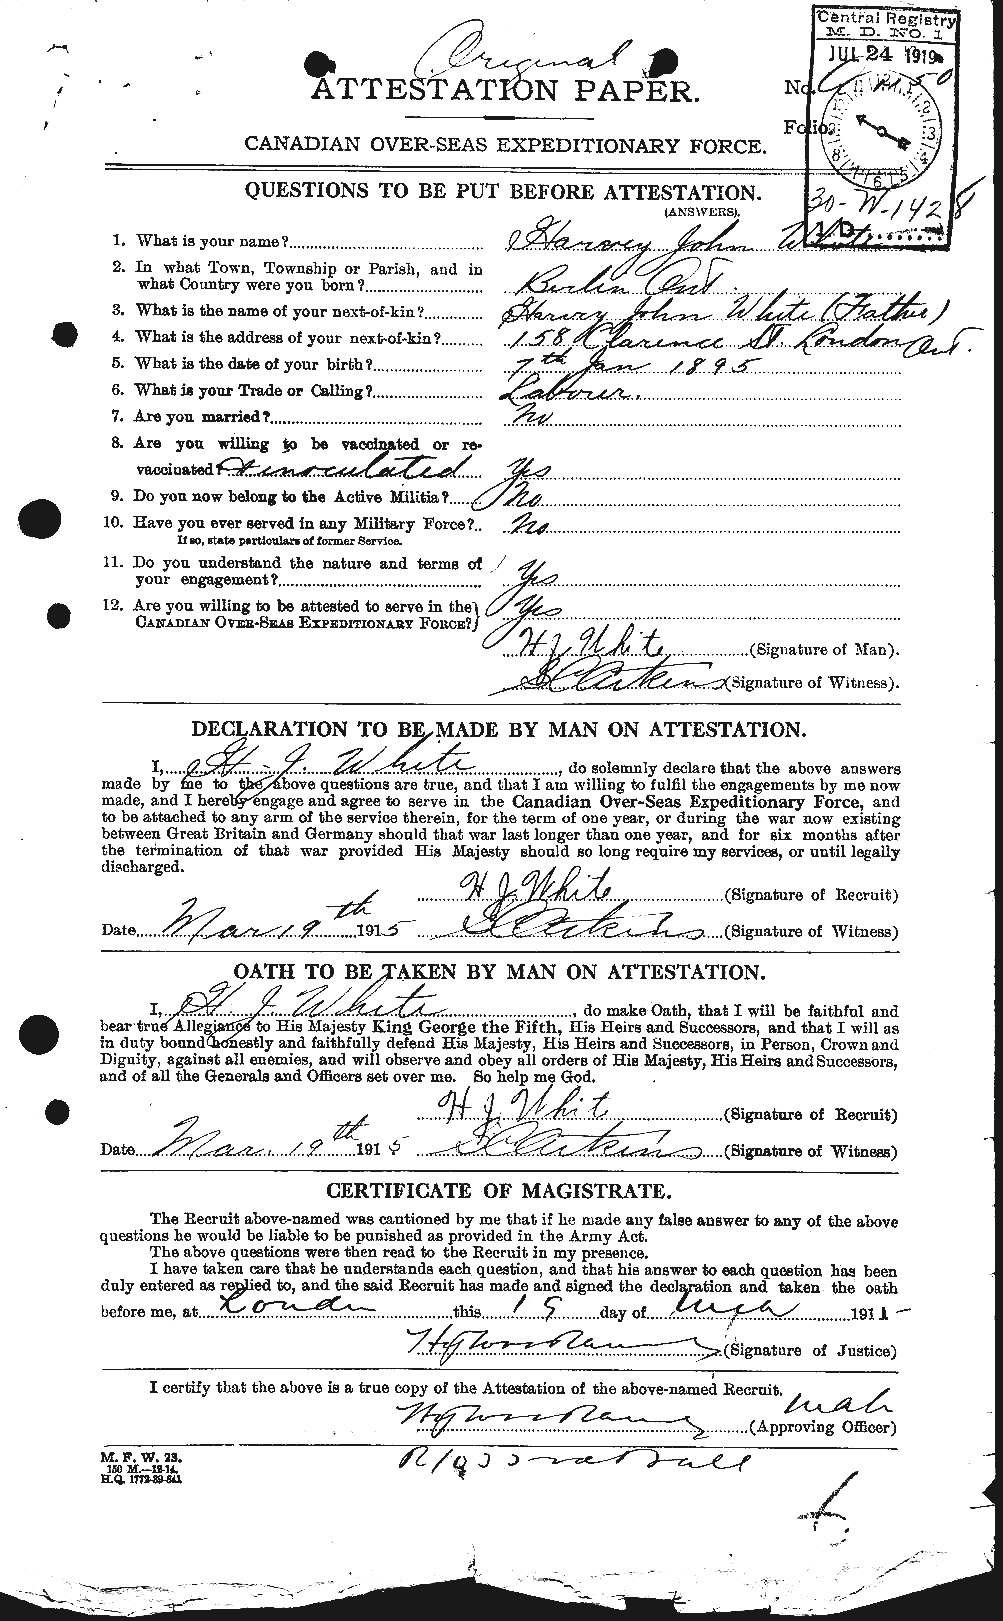 Personnel Records of the First World War - CEF 669629a